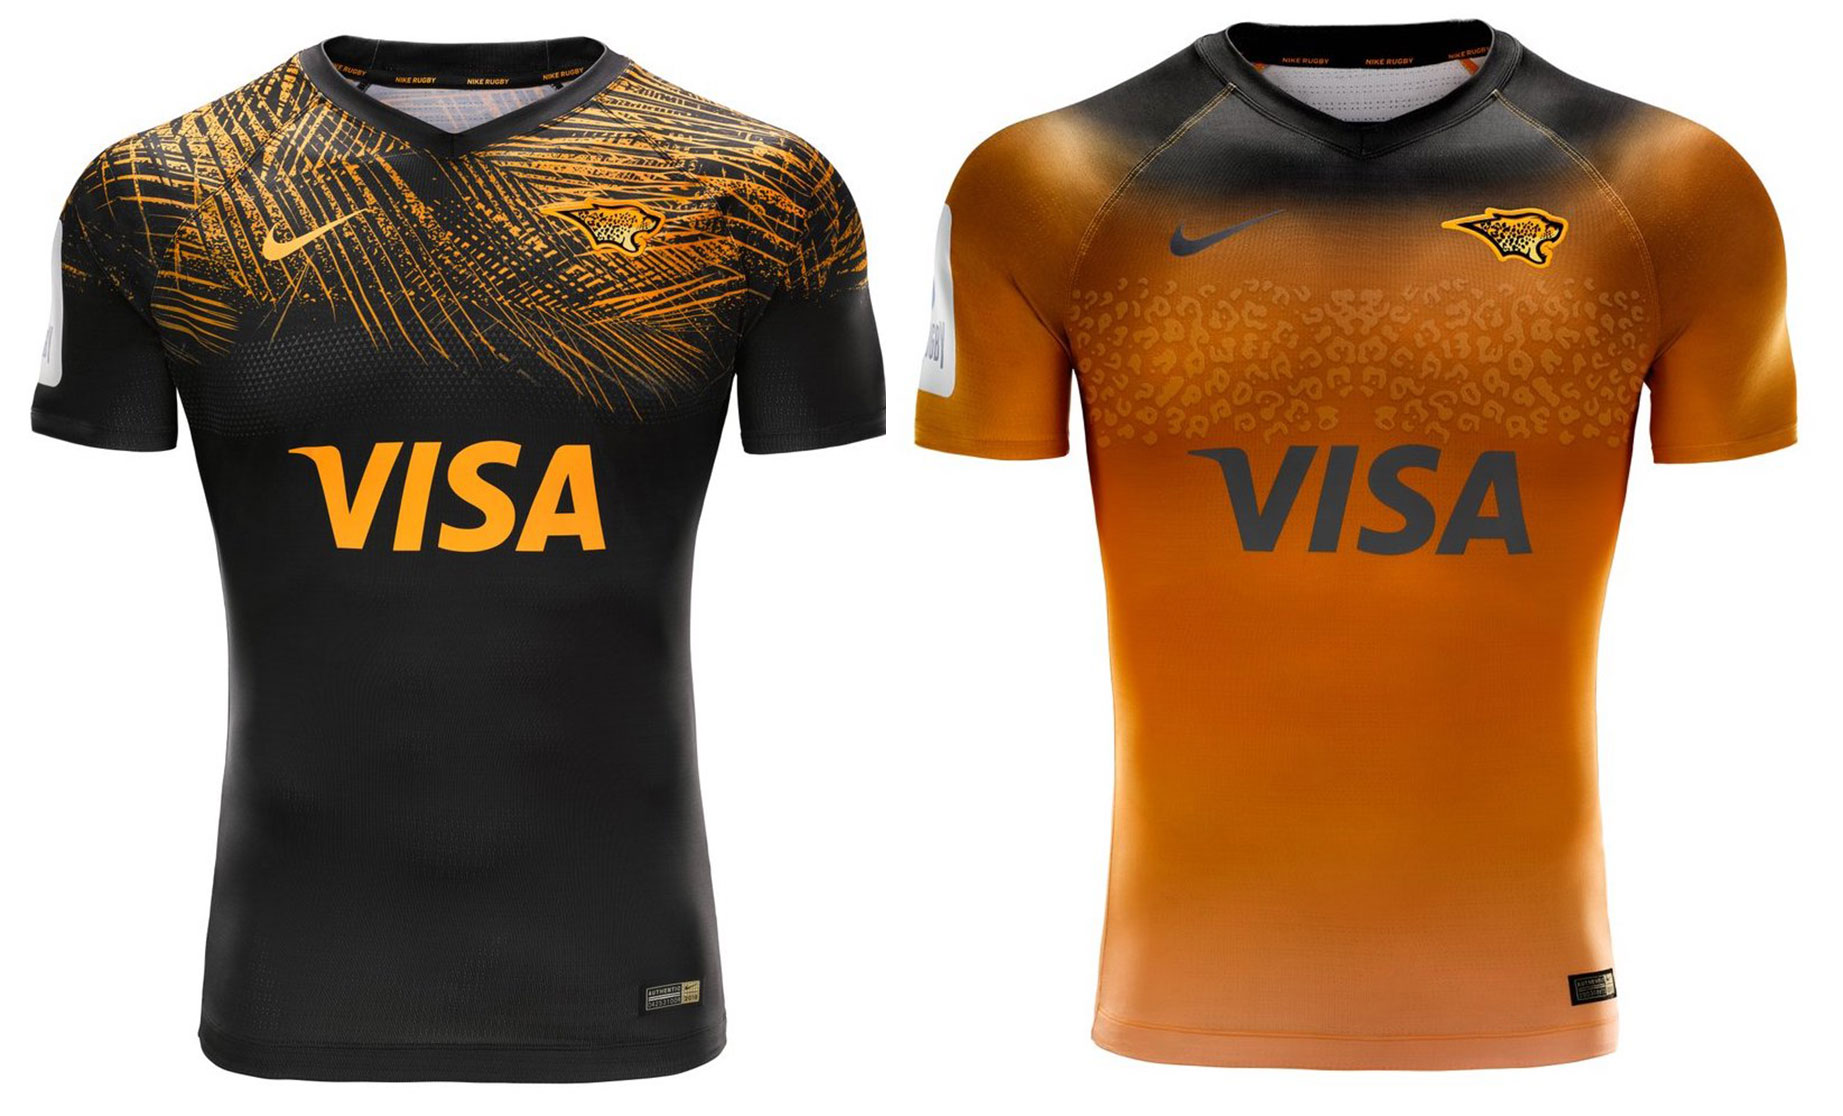 rugby kits 2019